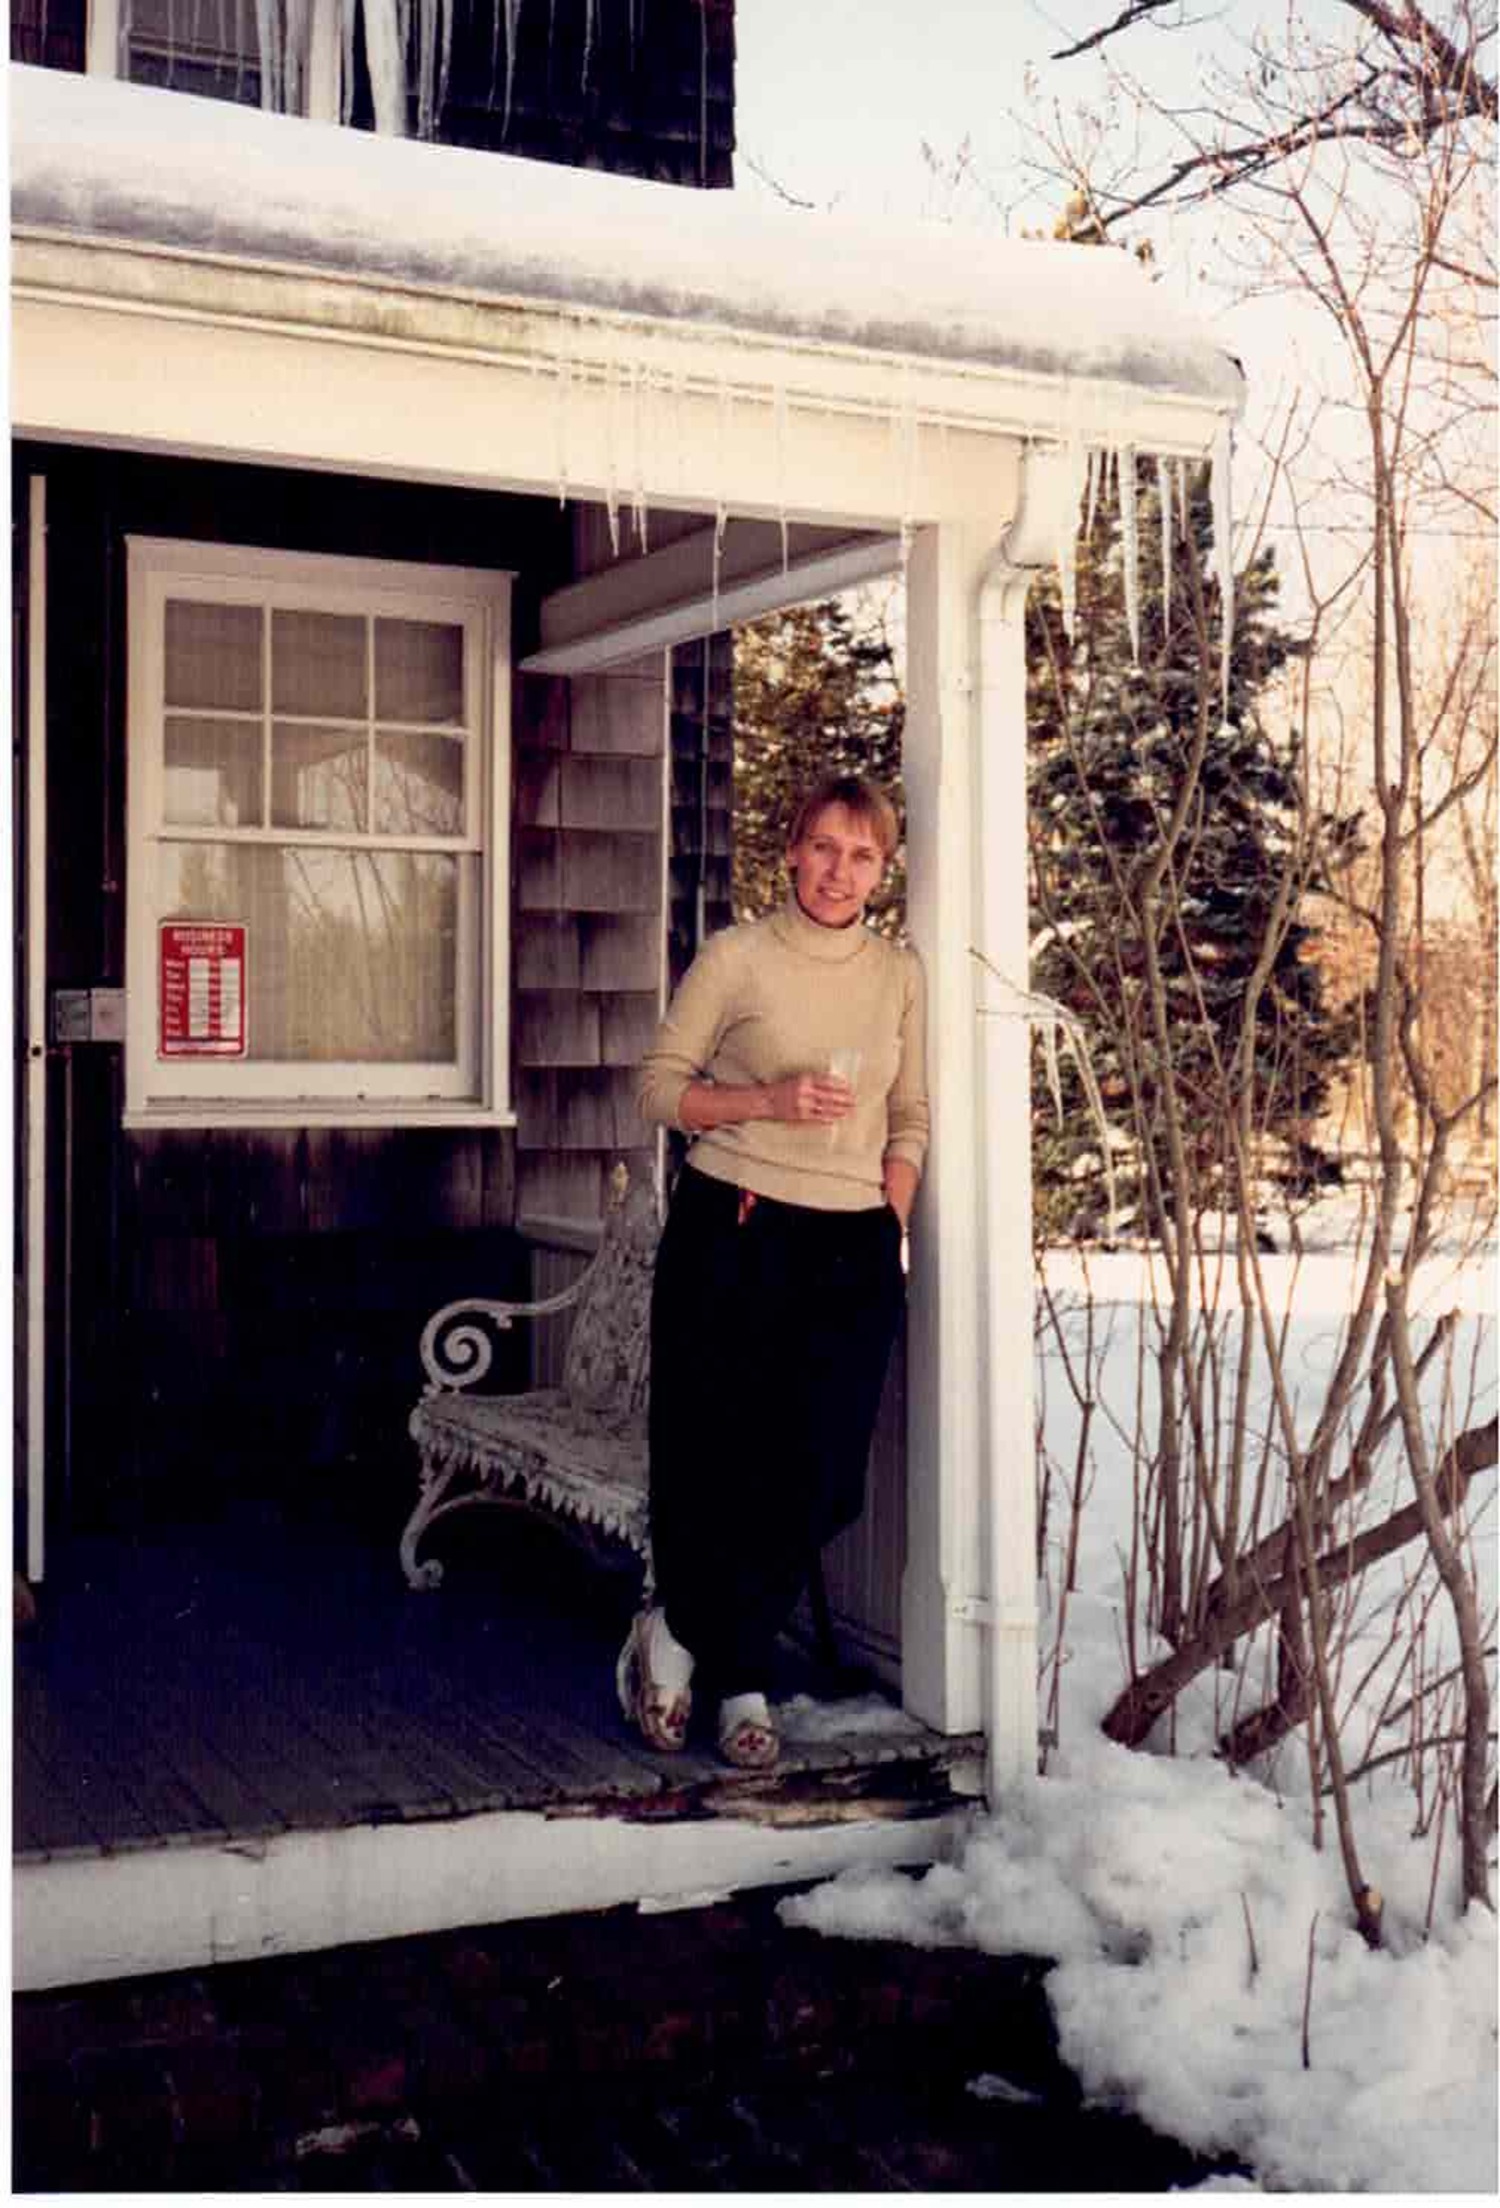 Helen A. Harrison on the porch of Pollock-Krasner House and Study Center in Springs on March 1, 1990 — her very first day on the job as director. ROY NICHOLSON